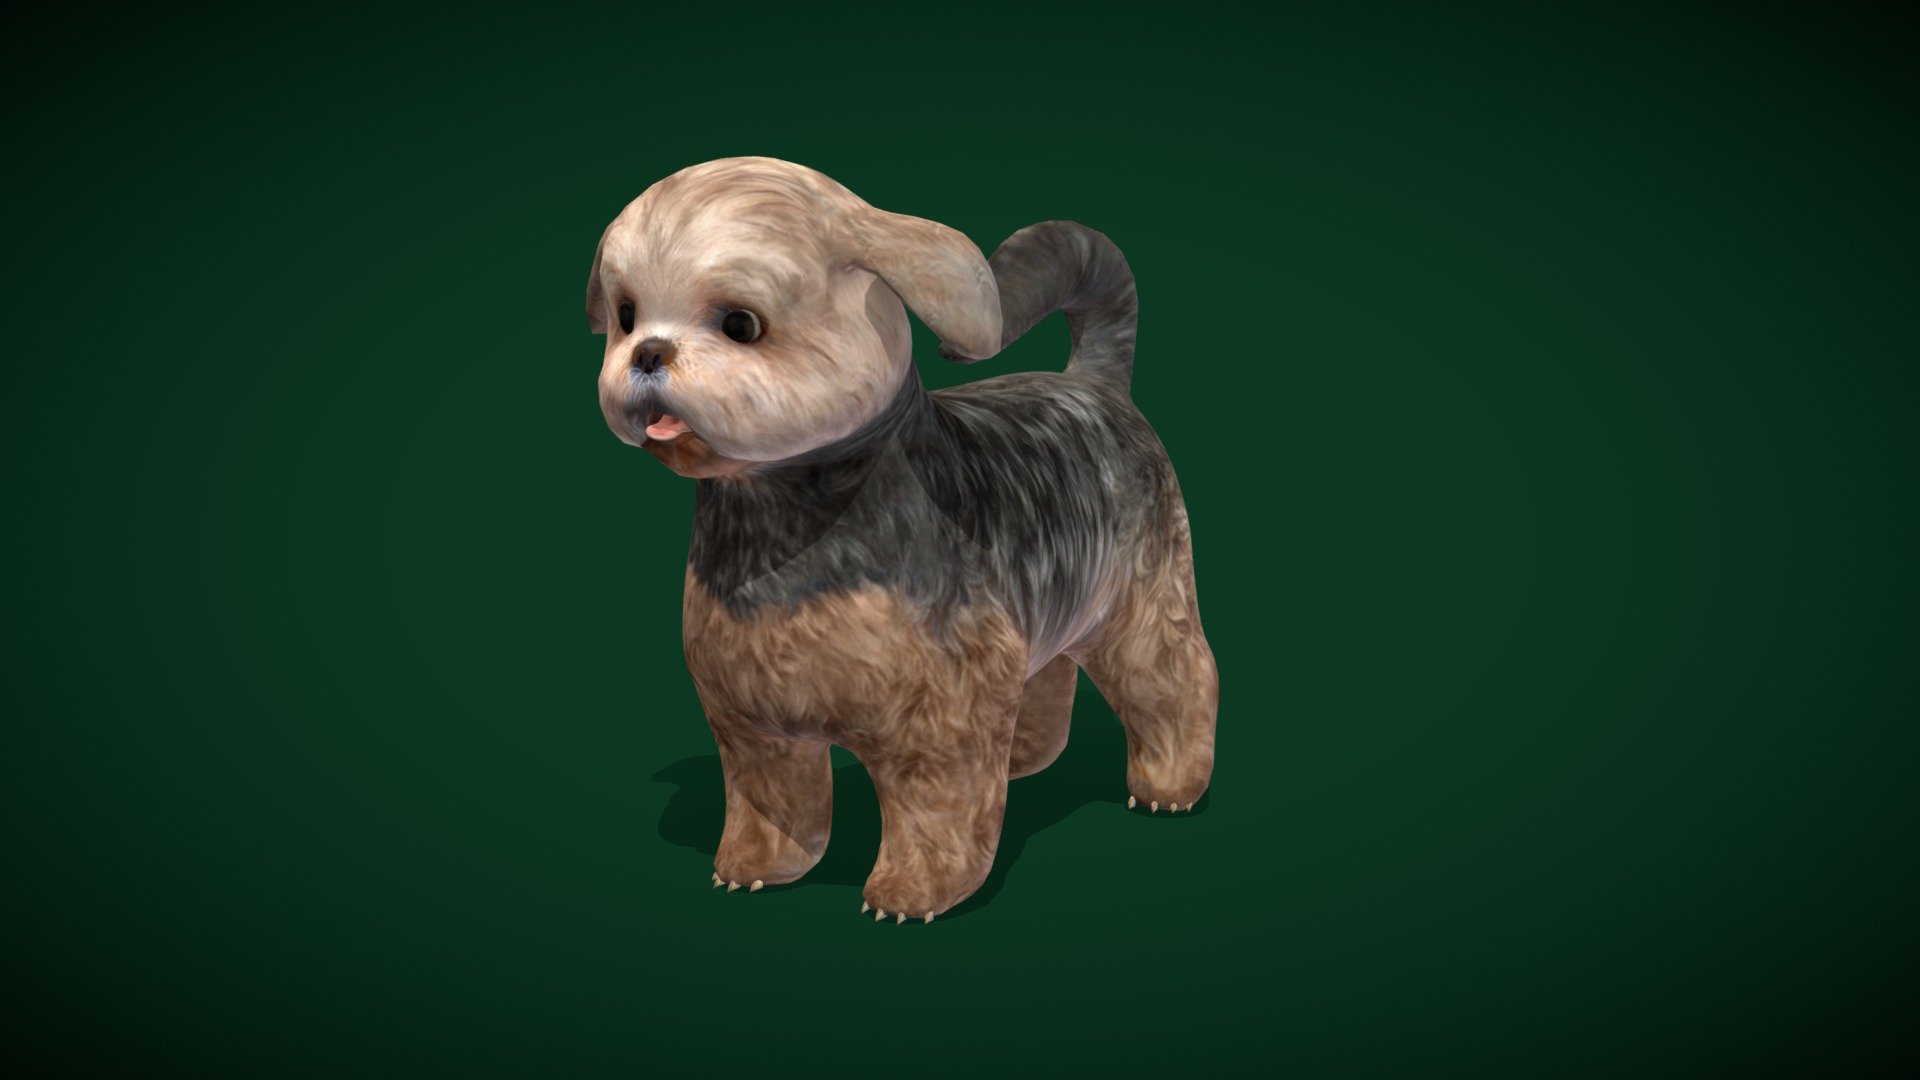 Shihtzu Dog  (Toy Dog Pet Dog Breed) 

Canis lupus familiaris Animal Mammal (  Cute ) Pekingese

1 Draw Calls

Lowpoly









1 Animations

4K PBR Textures Material

Unreal FBX

Unity FBX  

Blend File 

USDZ File (AR Ready). Real Scale Dimension

Textures Files

GLB File

Gltf File ( Spark AR, Lens Studio(SnapChat) , Effector(Tiktok) , Spline, Play Canvas ) Compatible

Triangles : 9608

Vertices  : 4934

Faces     : 6117

Edges     : 11030

The Shih Tzu is a toy_dog or pet_dog breed originating from Tibet and believed to be bred from the Pekingese and the Lhasa Apso. Shih Tzus are known for their short snouts and large round eyes, as well as their long coat, floppy ears, and short and stout posture. Wikipedia
Temperament: Playful, Clever, Affectionate, Lively, Intelligent, MORE - Shih Tzu Dog Breed (Lowpoly) - Buy Royalty Free 3D model by Nyilonelycompany 3d model